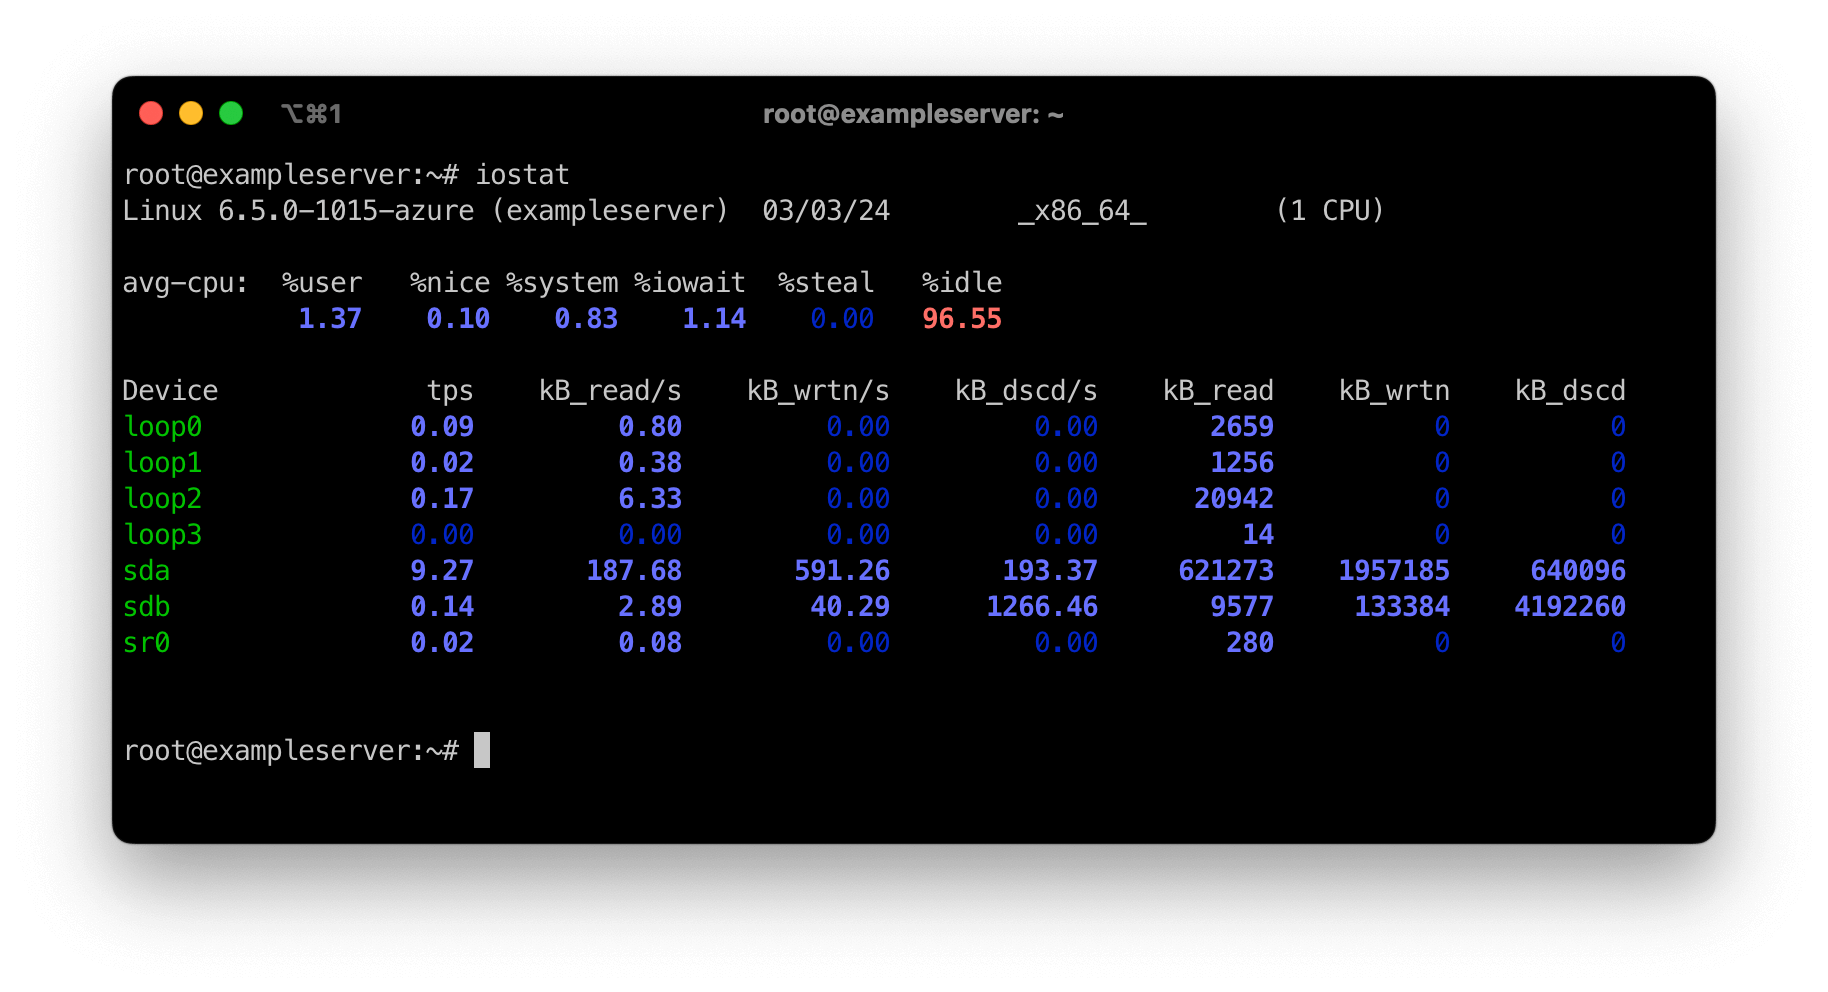 Screenshot of a Linux terminal showing the output of the iostat command